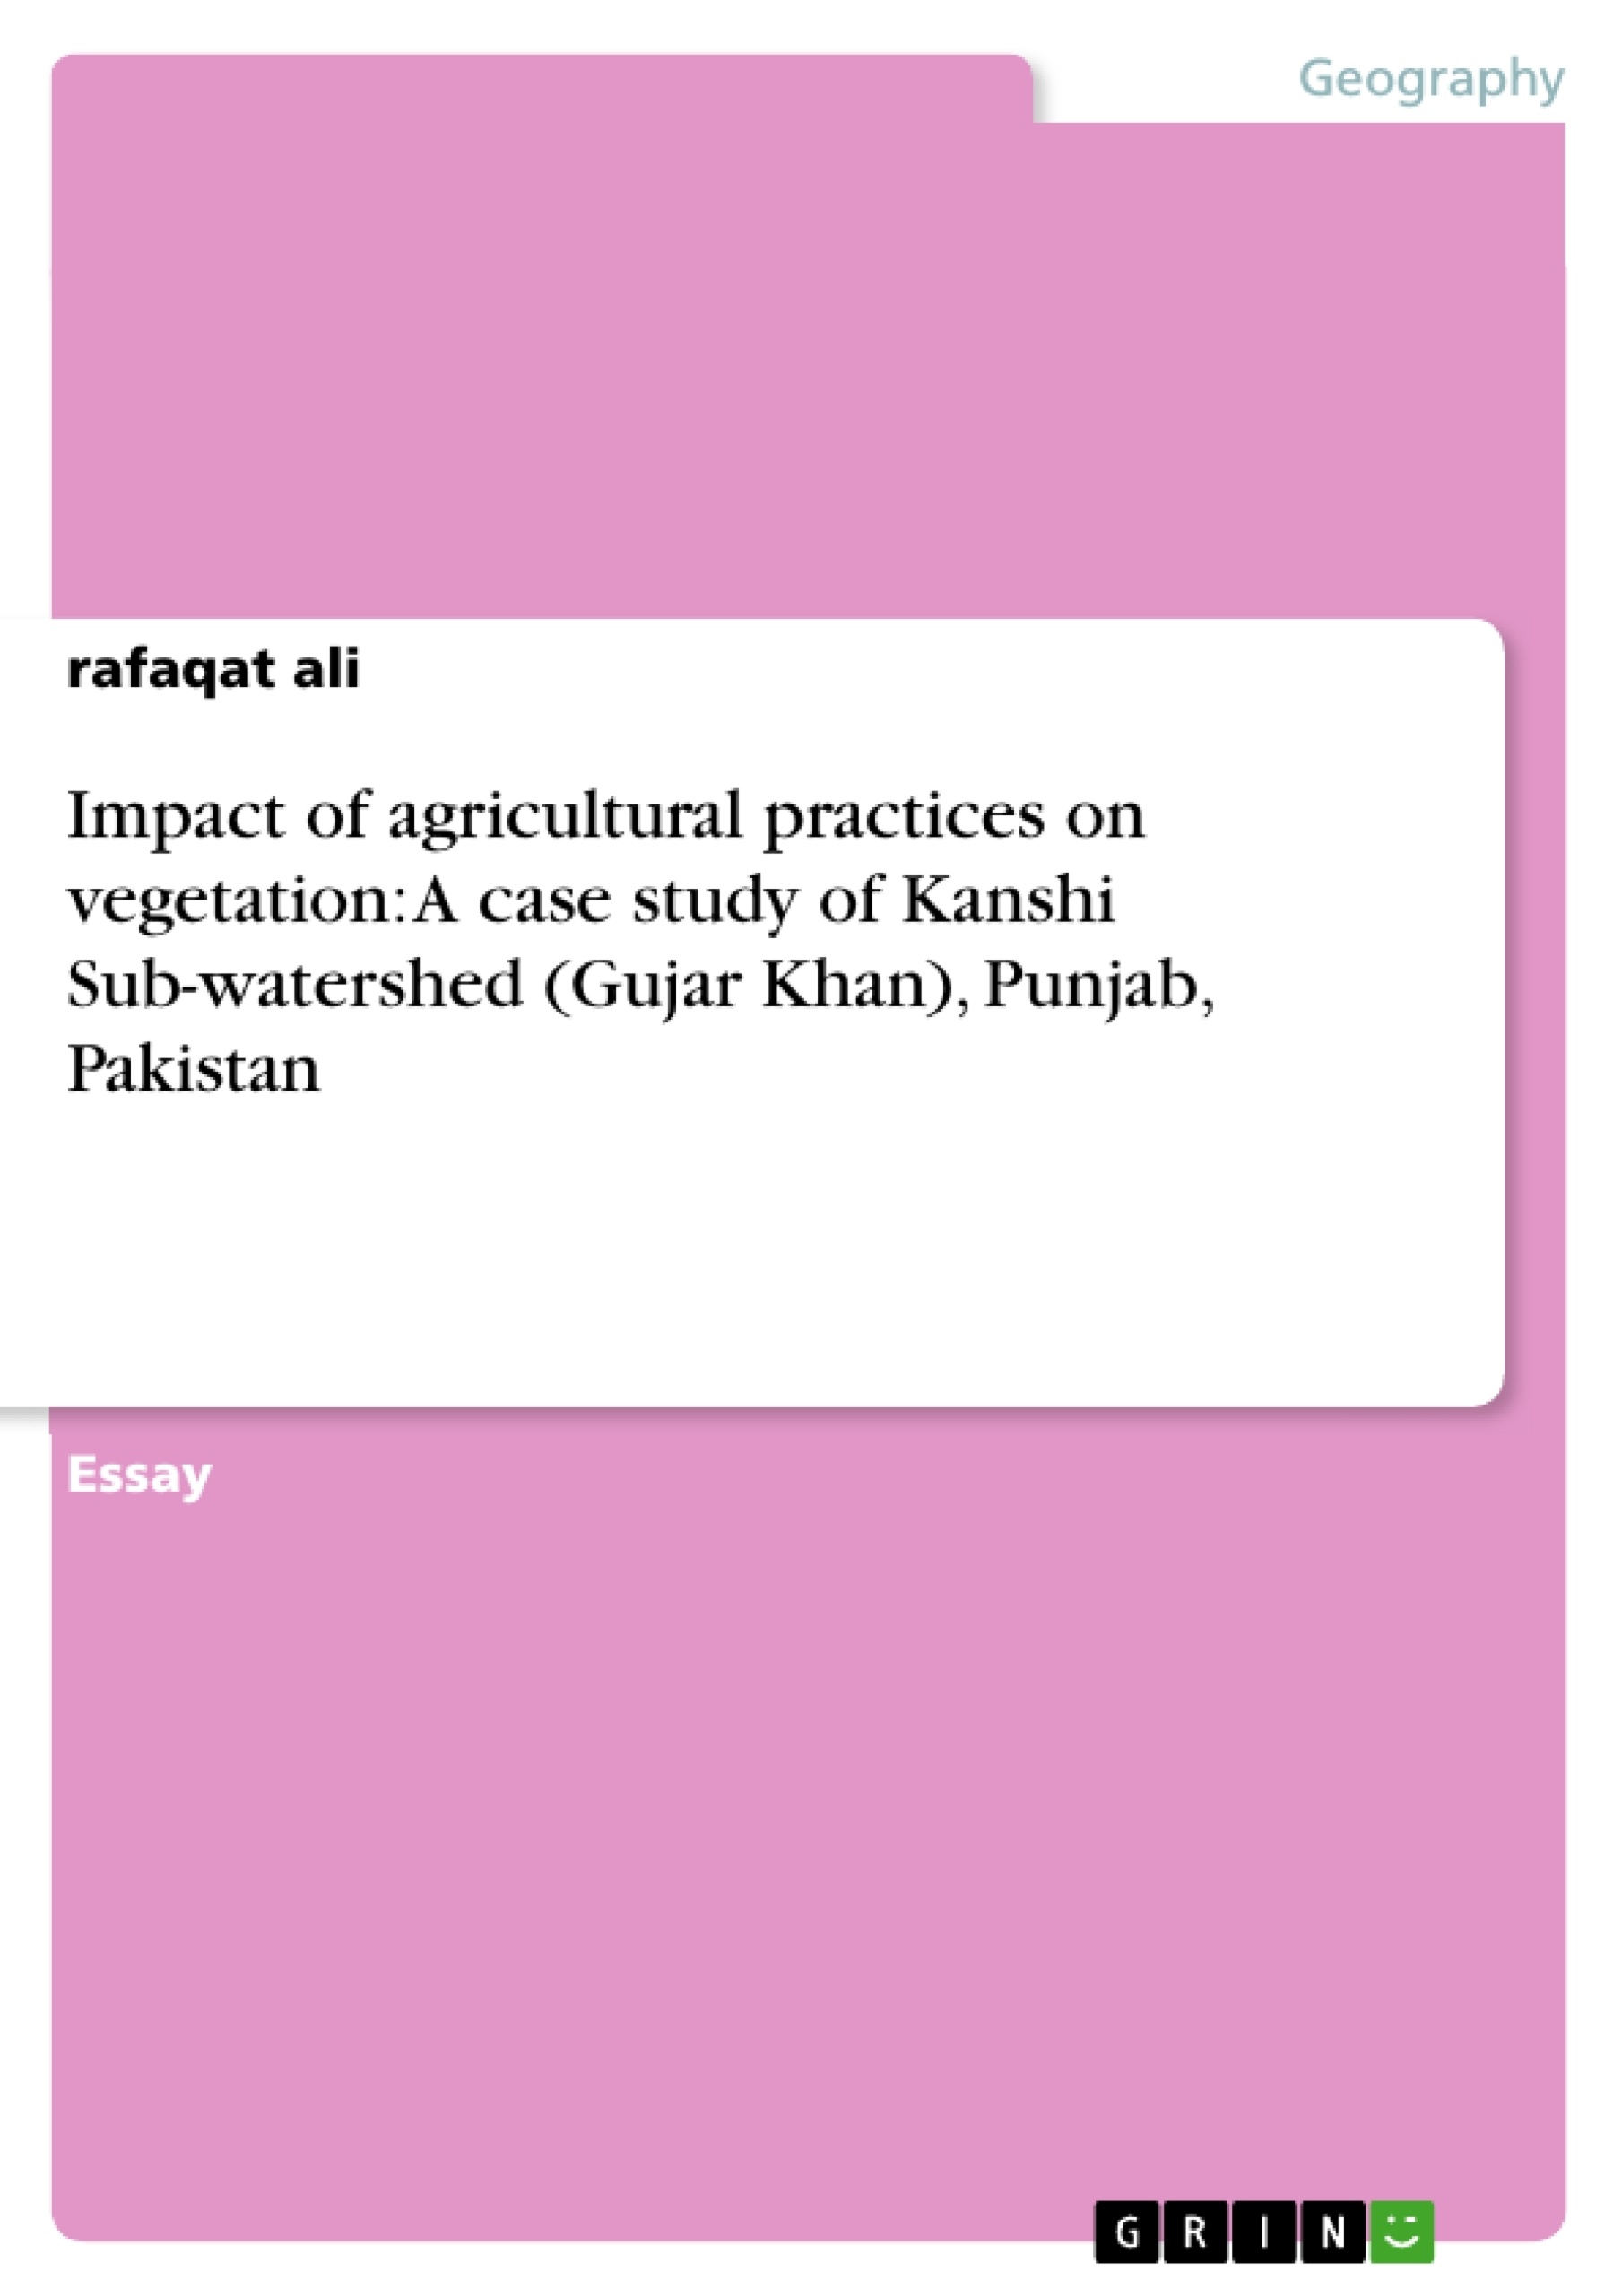 Title: Impact of agricultural practices on vegetation: A case study of Kanshi Sub-watershed (Gujar Khan), Punjab, Pakistan